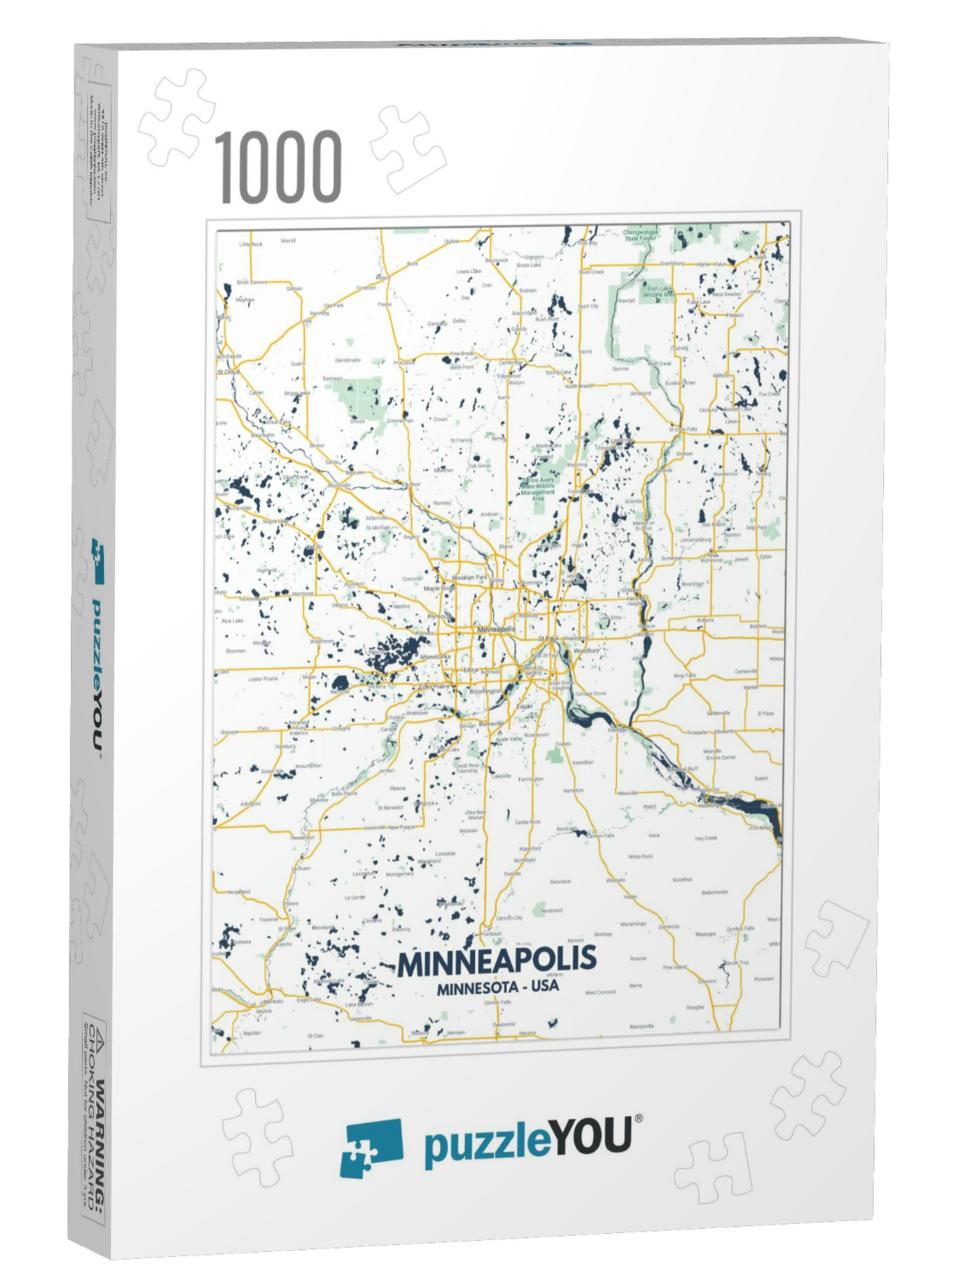 Minneapolis - Minnesota Map. Minneapolis - Minnesota Road... Jigsaw Puzzle with 1000 pieces